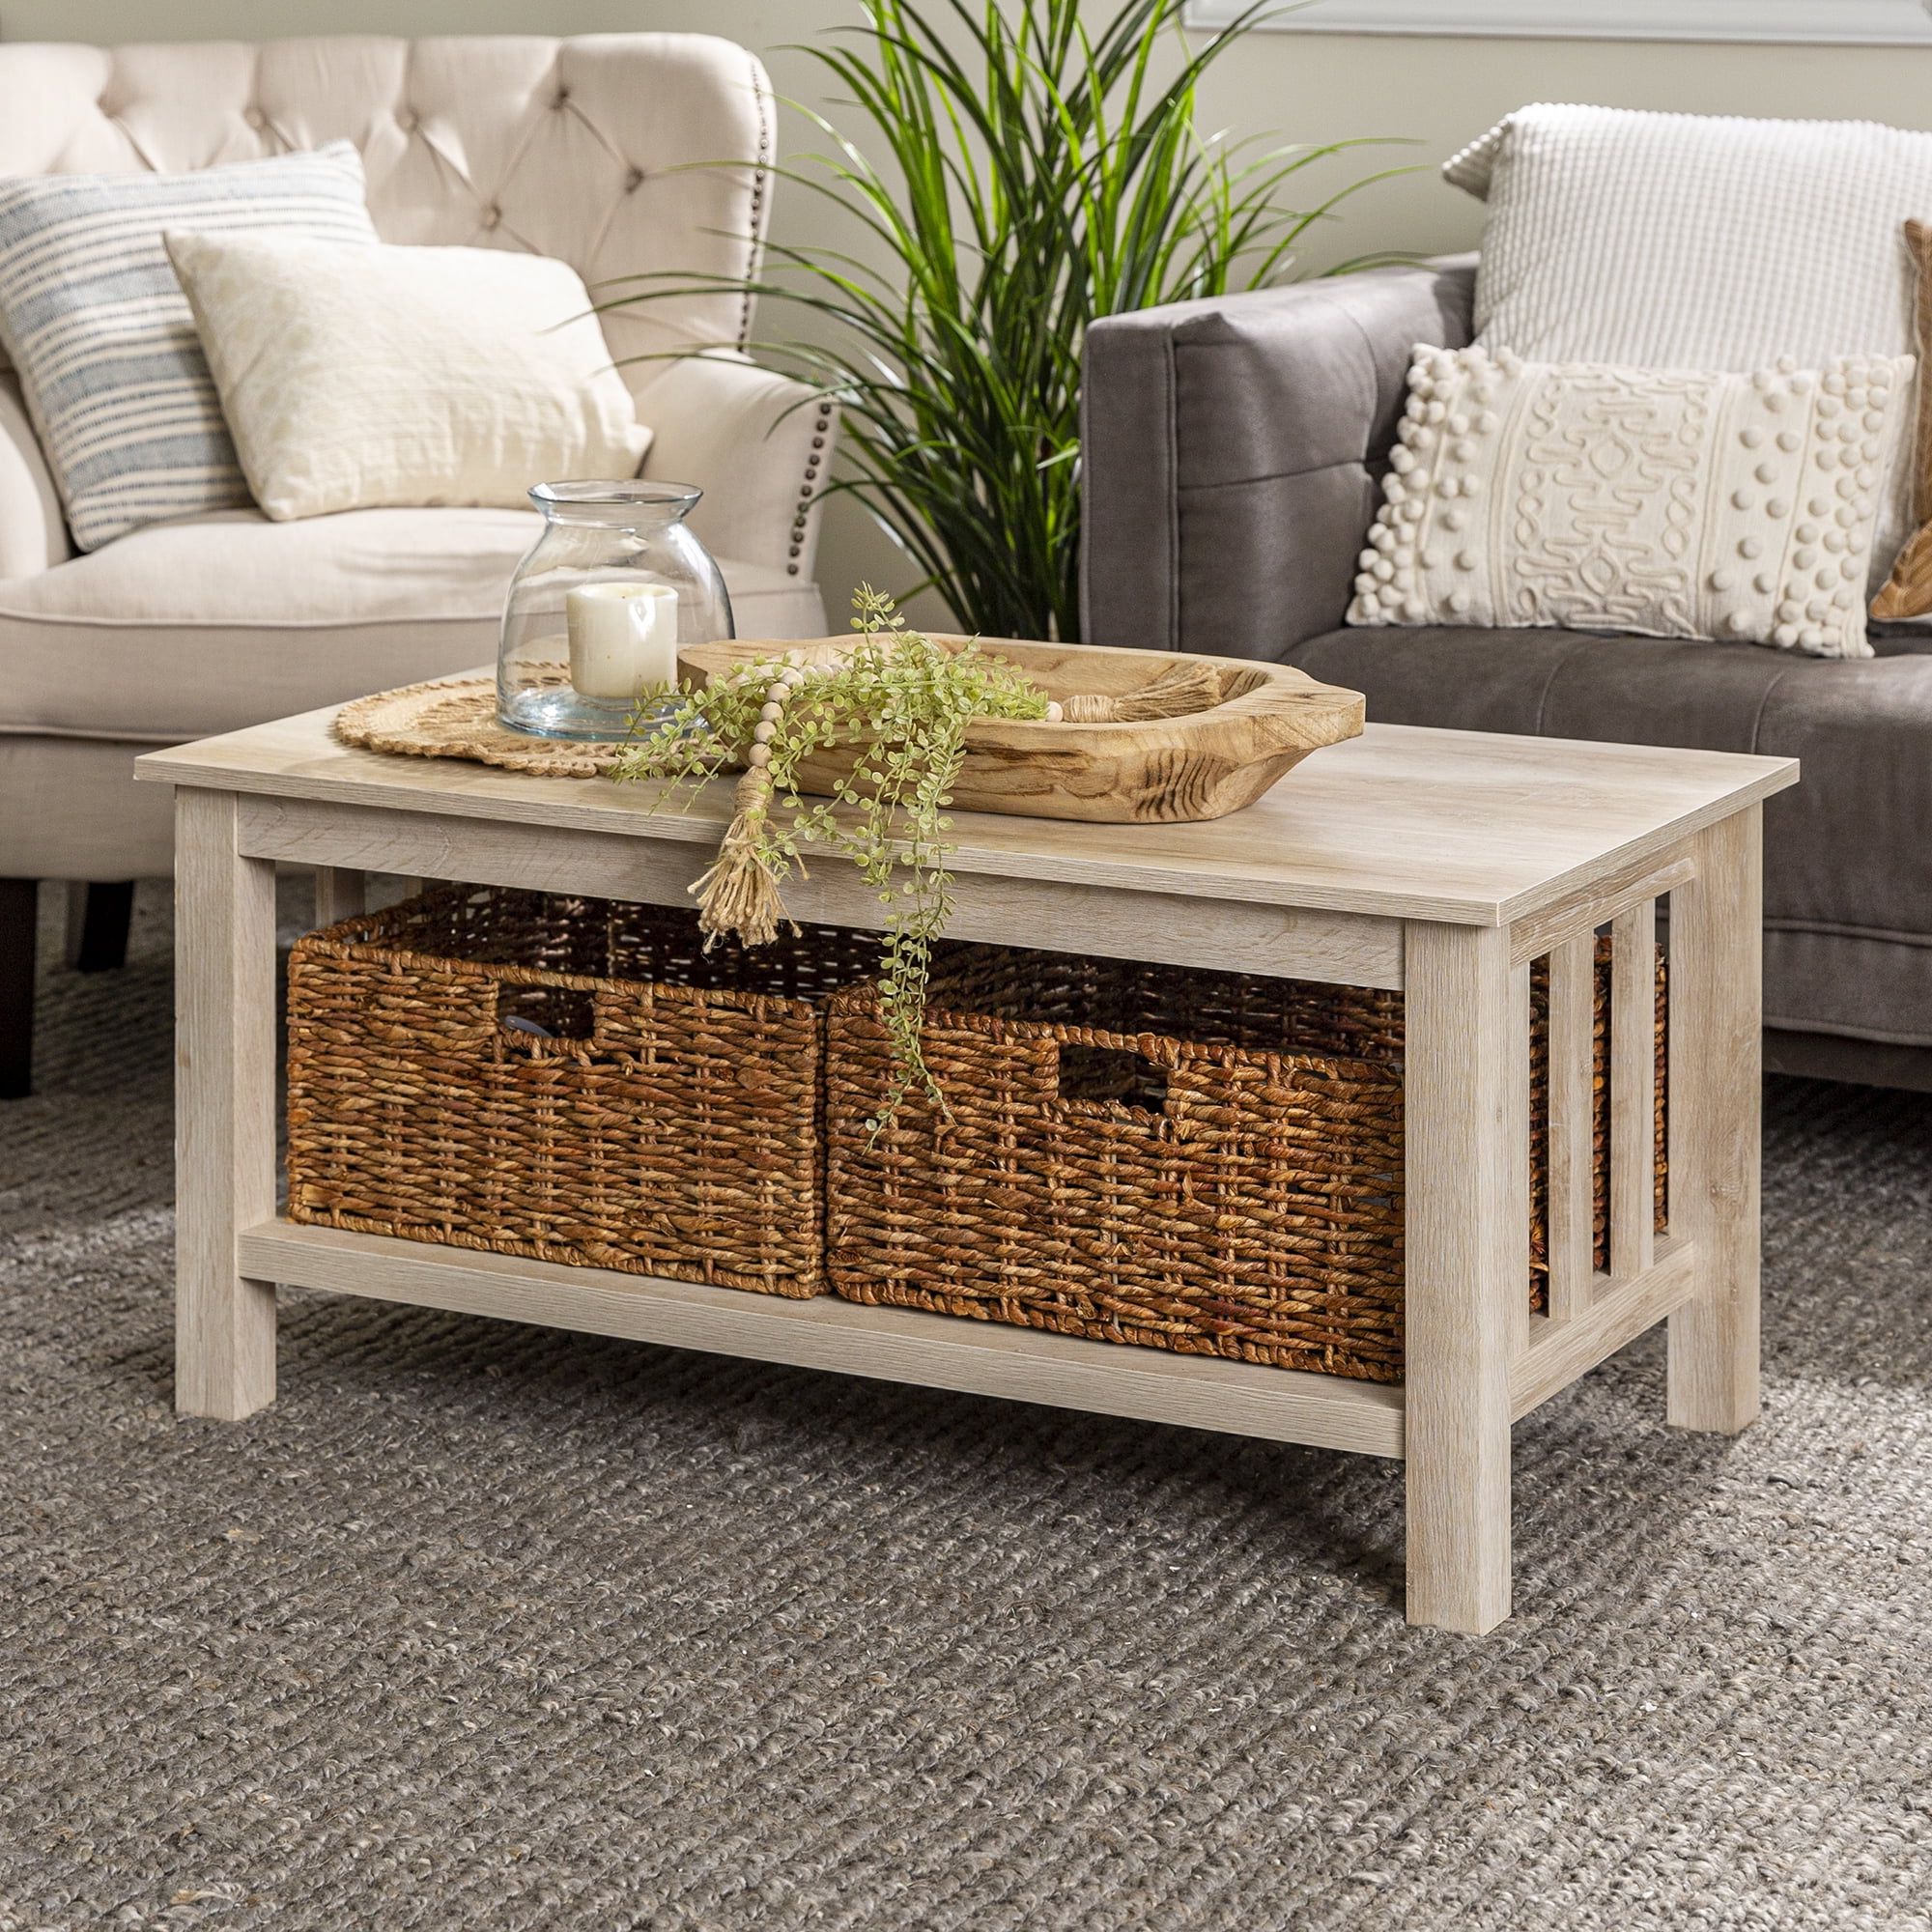 Woven Paths Traditional Storage Coffee Table With Bins, White Oak With Regard To Woven Paths Coffee Tables (View 3 of 20)